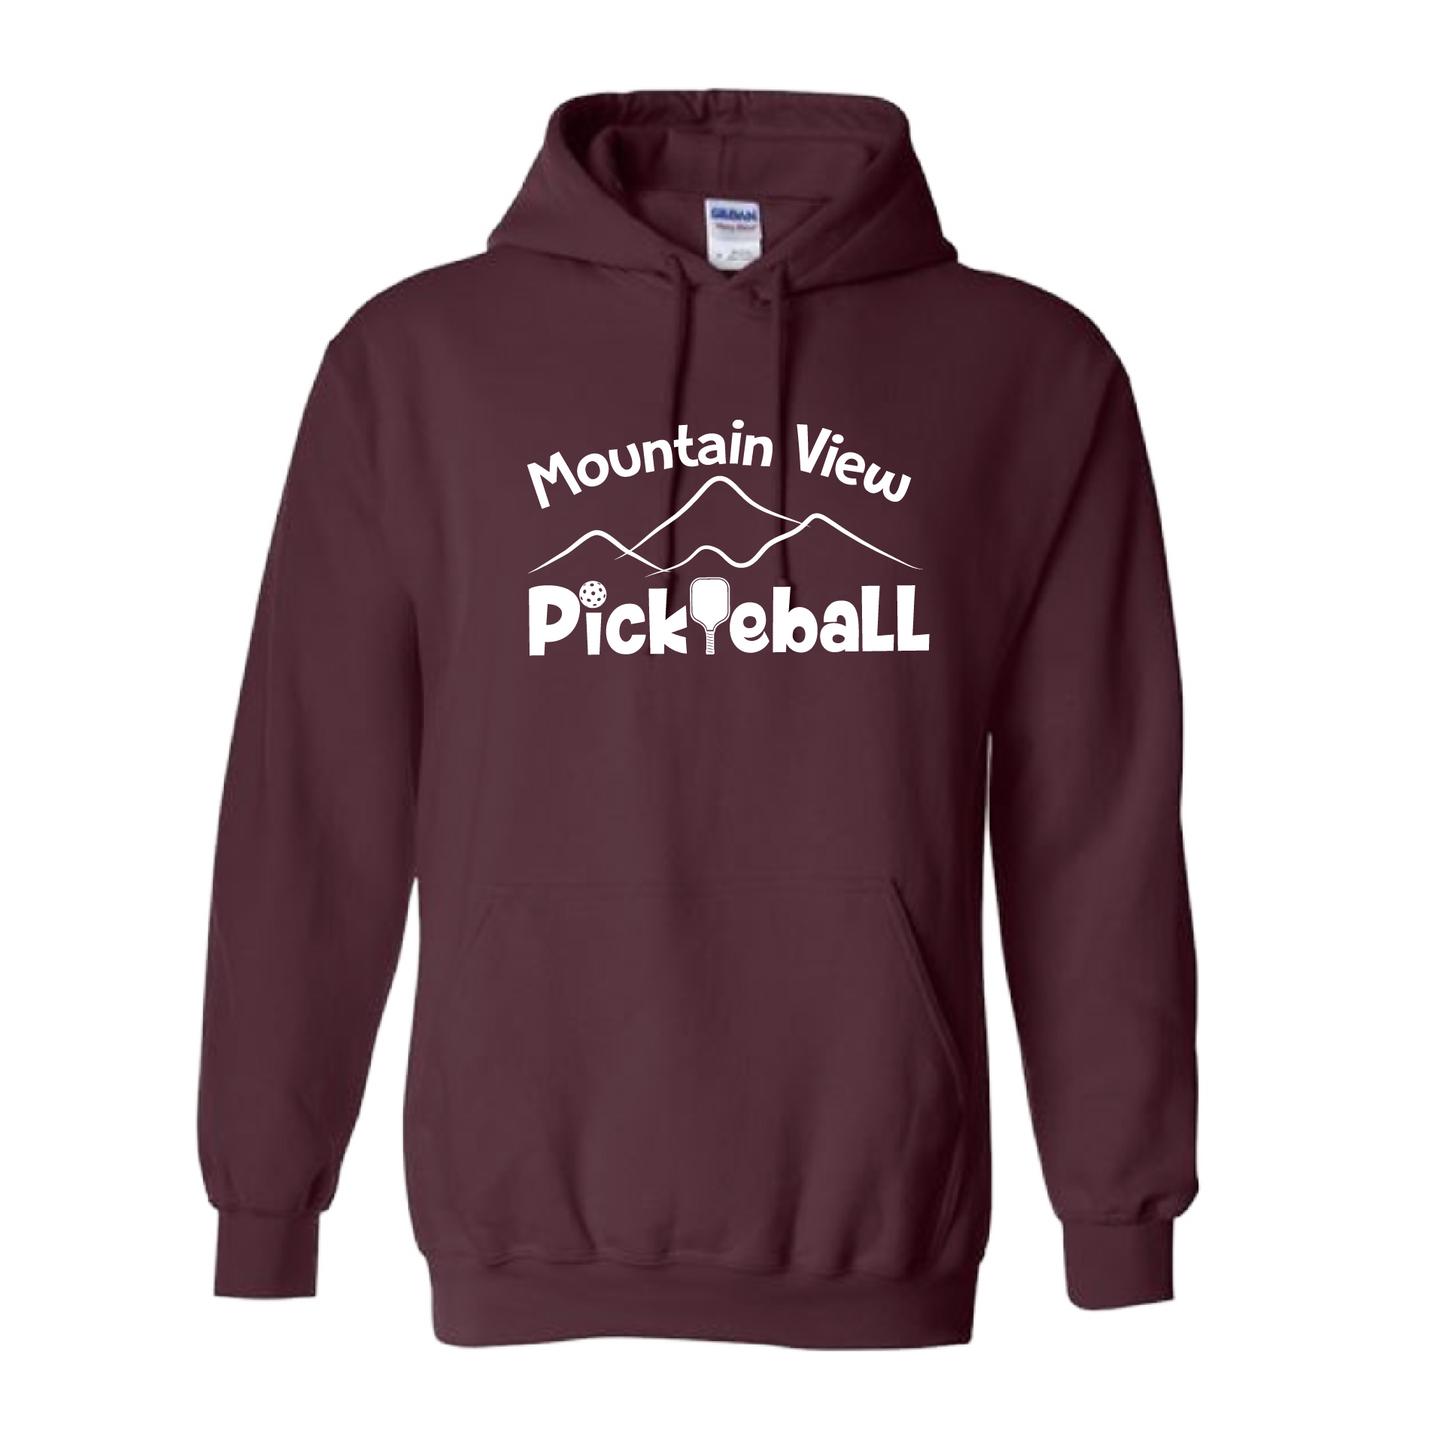 Pickleball Design: Mountain View Pickleball  Unisex Hooded Sweatshirt: 50/50 Cotton/Polyester, Moisture-wicking, double-lined hood, front pouch pocket.  This unisex hooded sweatshirt is ultra comfortable and soft. Stay warm on the Pickleball courts while being that hit with this one of kind design.